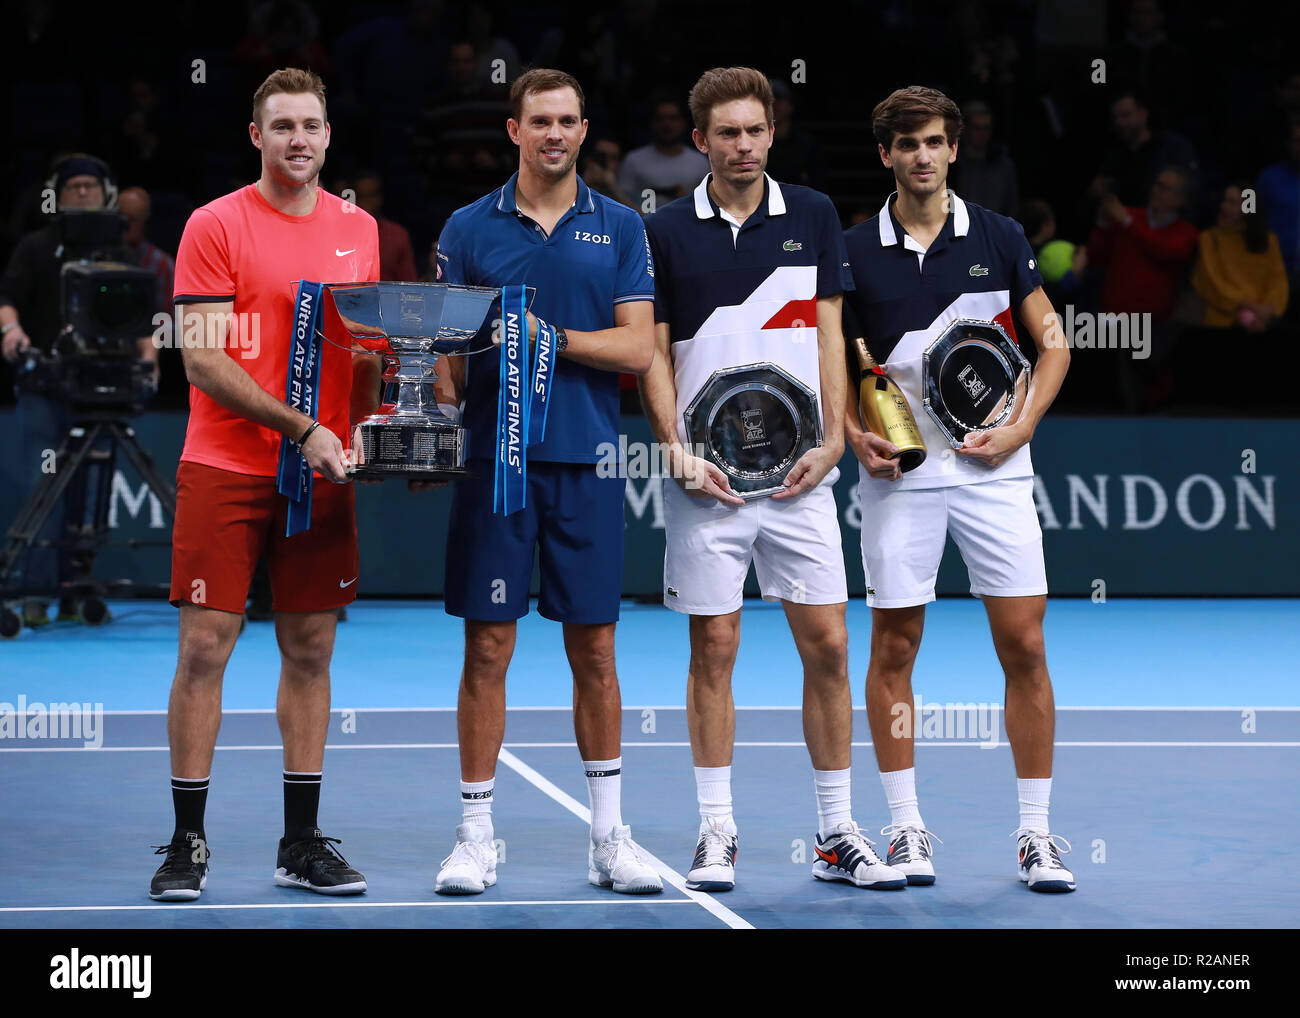 London, UK. 18th November 2018. London, UK. 18th November 2018. London UK.  18th November 2018. Nitto ATP Tennis Finals; Mike Bryan (USA) and doubles  partner Jack Sock (USA) pose with the the